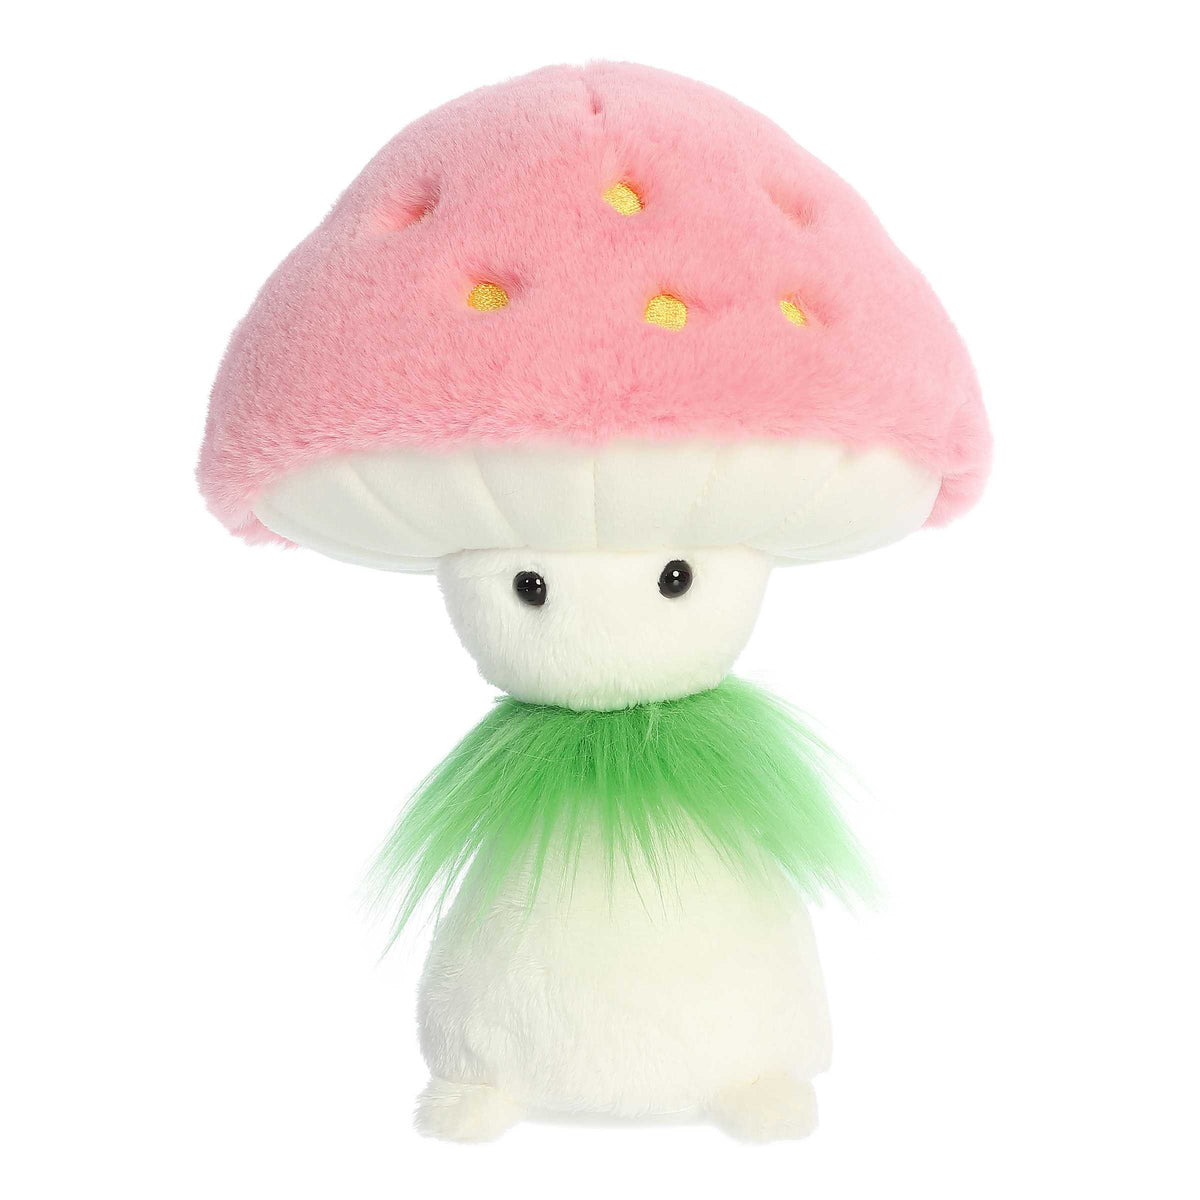 Strawberry mushroom plush from Fungi Friends, featuring a vibrant pink cap and green ruff!